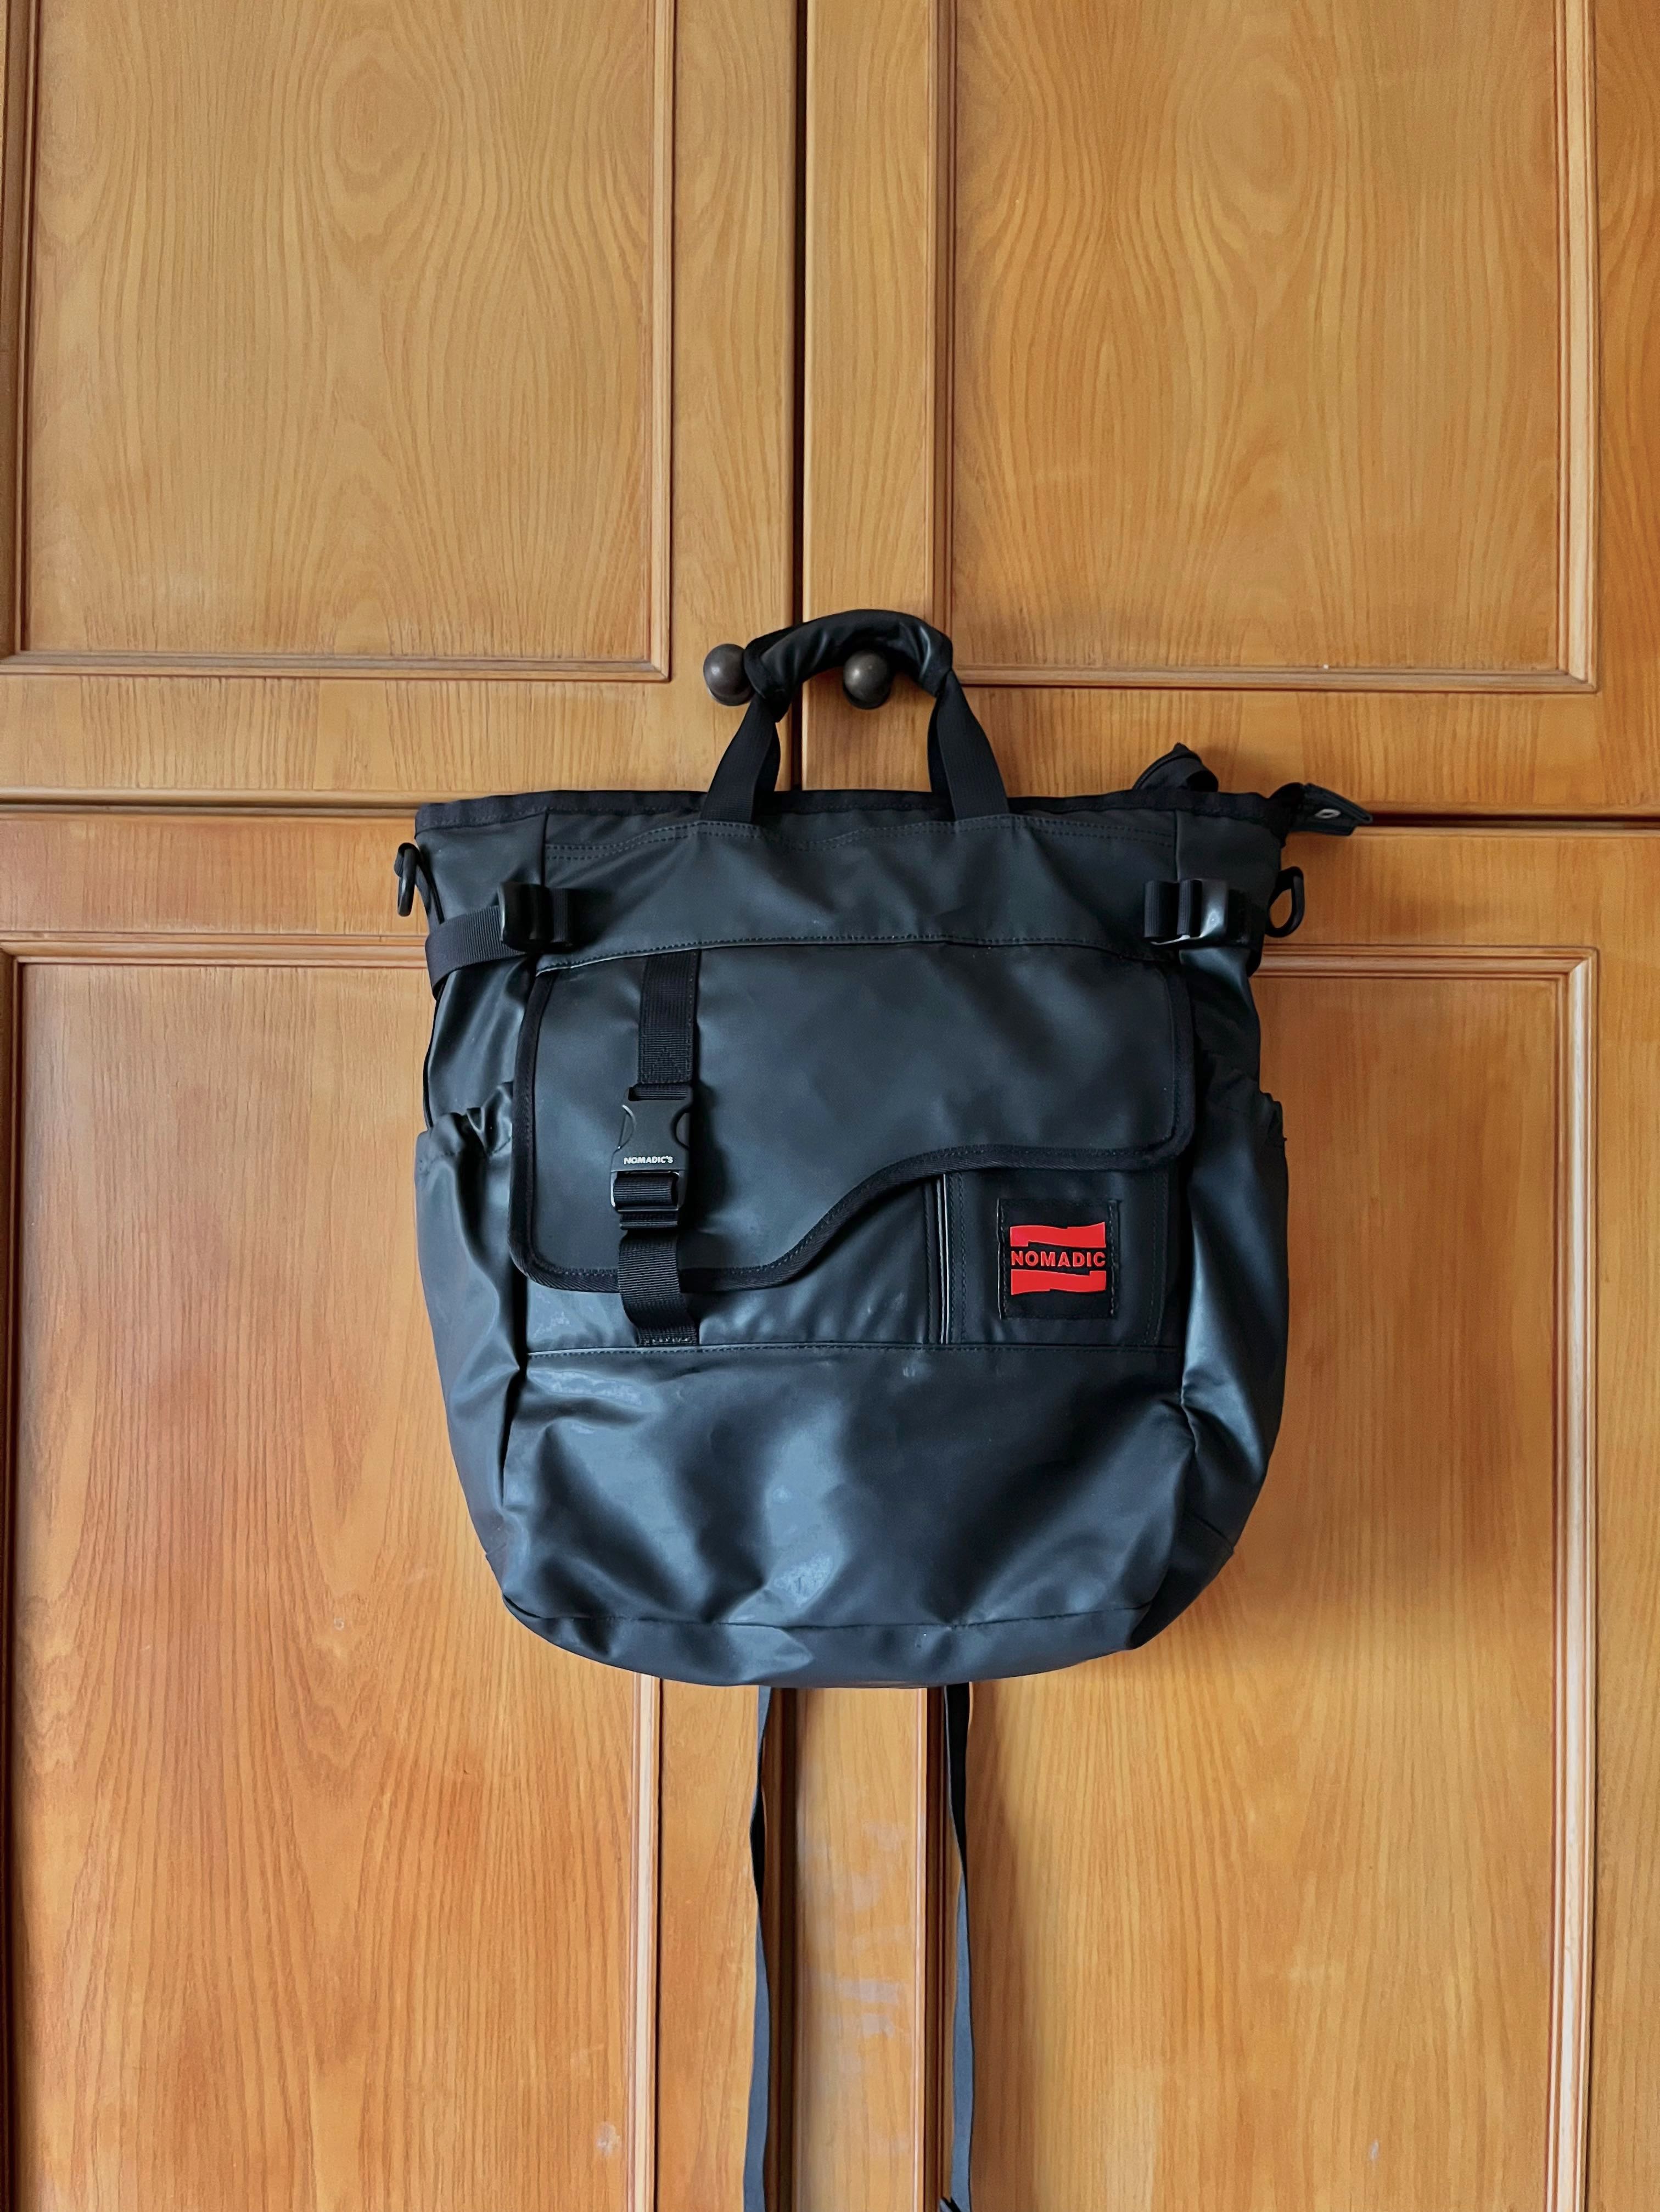 Bag Week 2018: The Nomadic NF-02 keeps everything in its right place |  TechCrunch